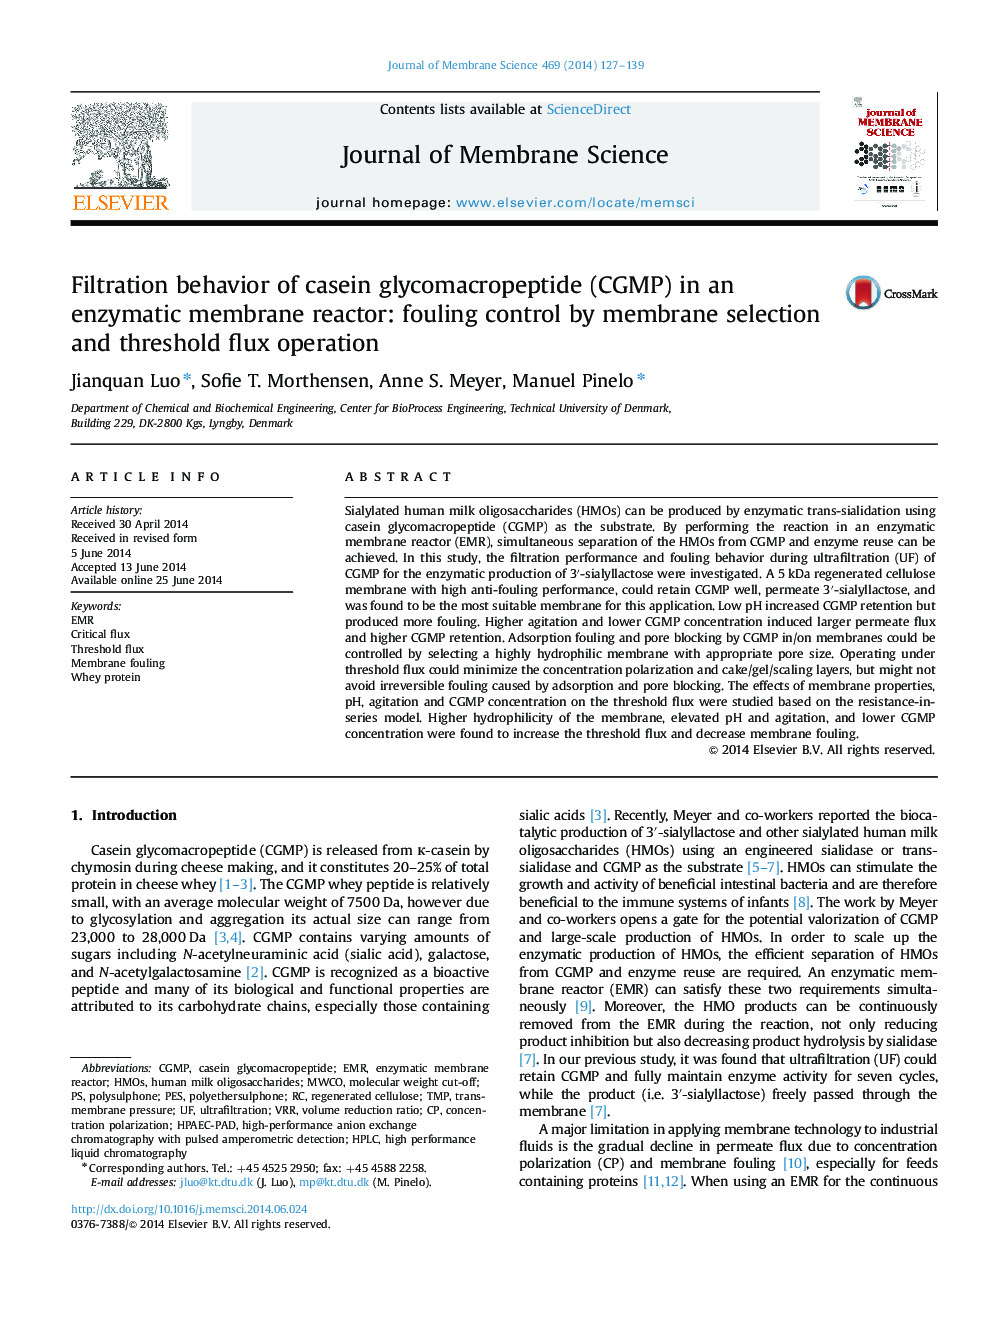 Filtration behavior of casein glycomacropeptide (CGMP) in an enzymatic membrane reactor: fouling control by membrane selection and threshold flux operation